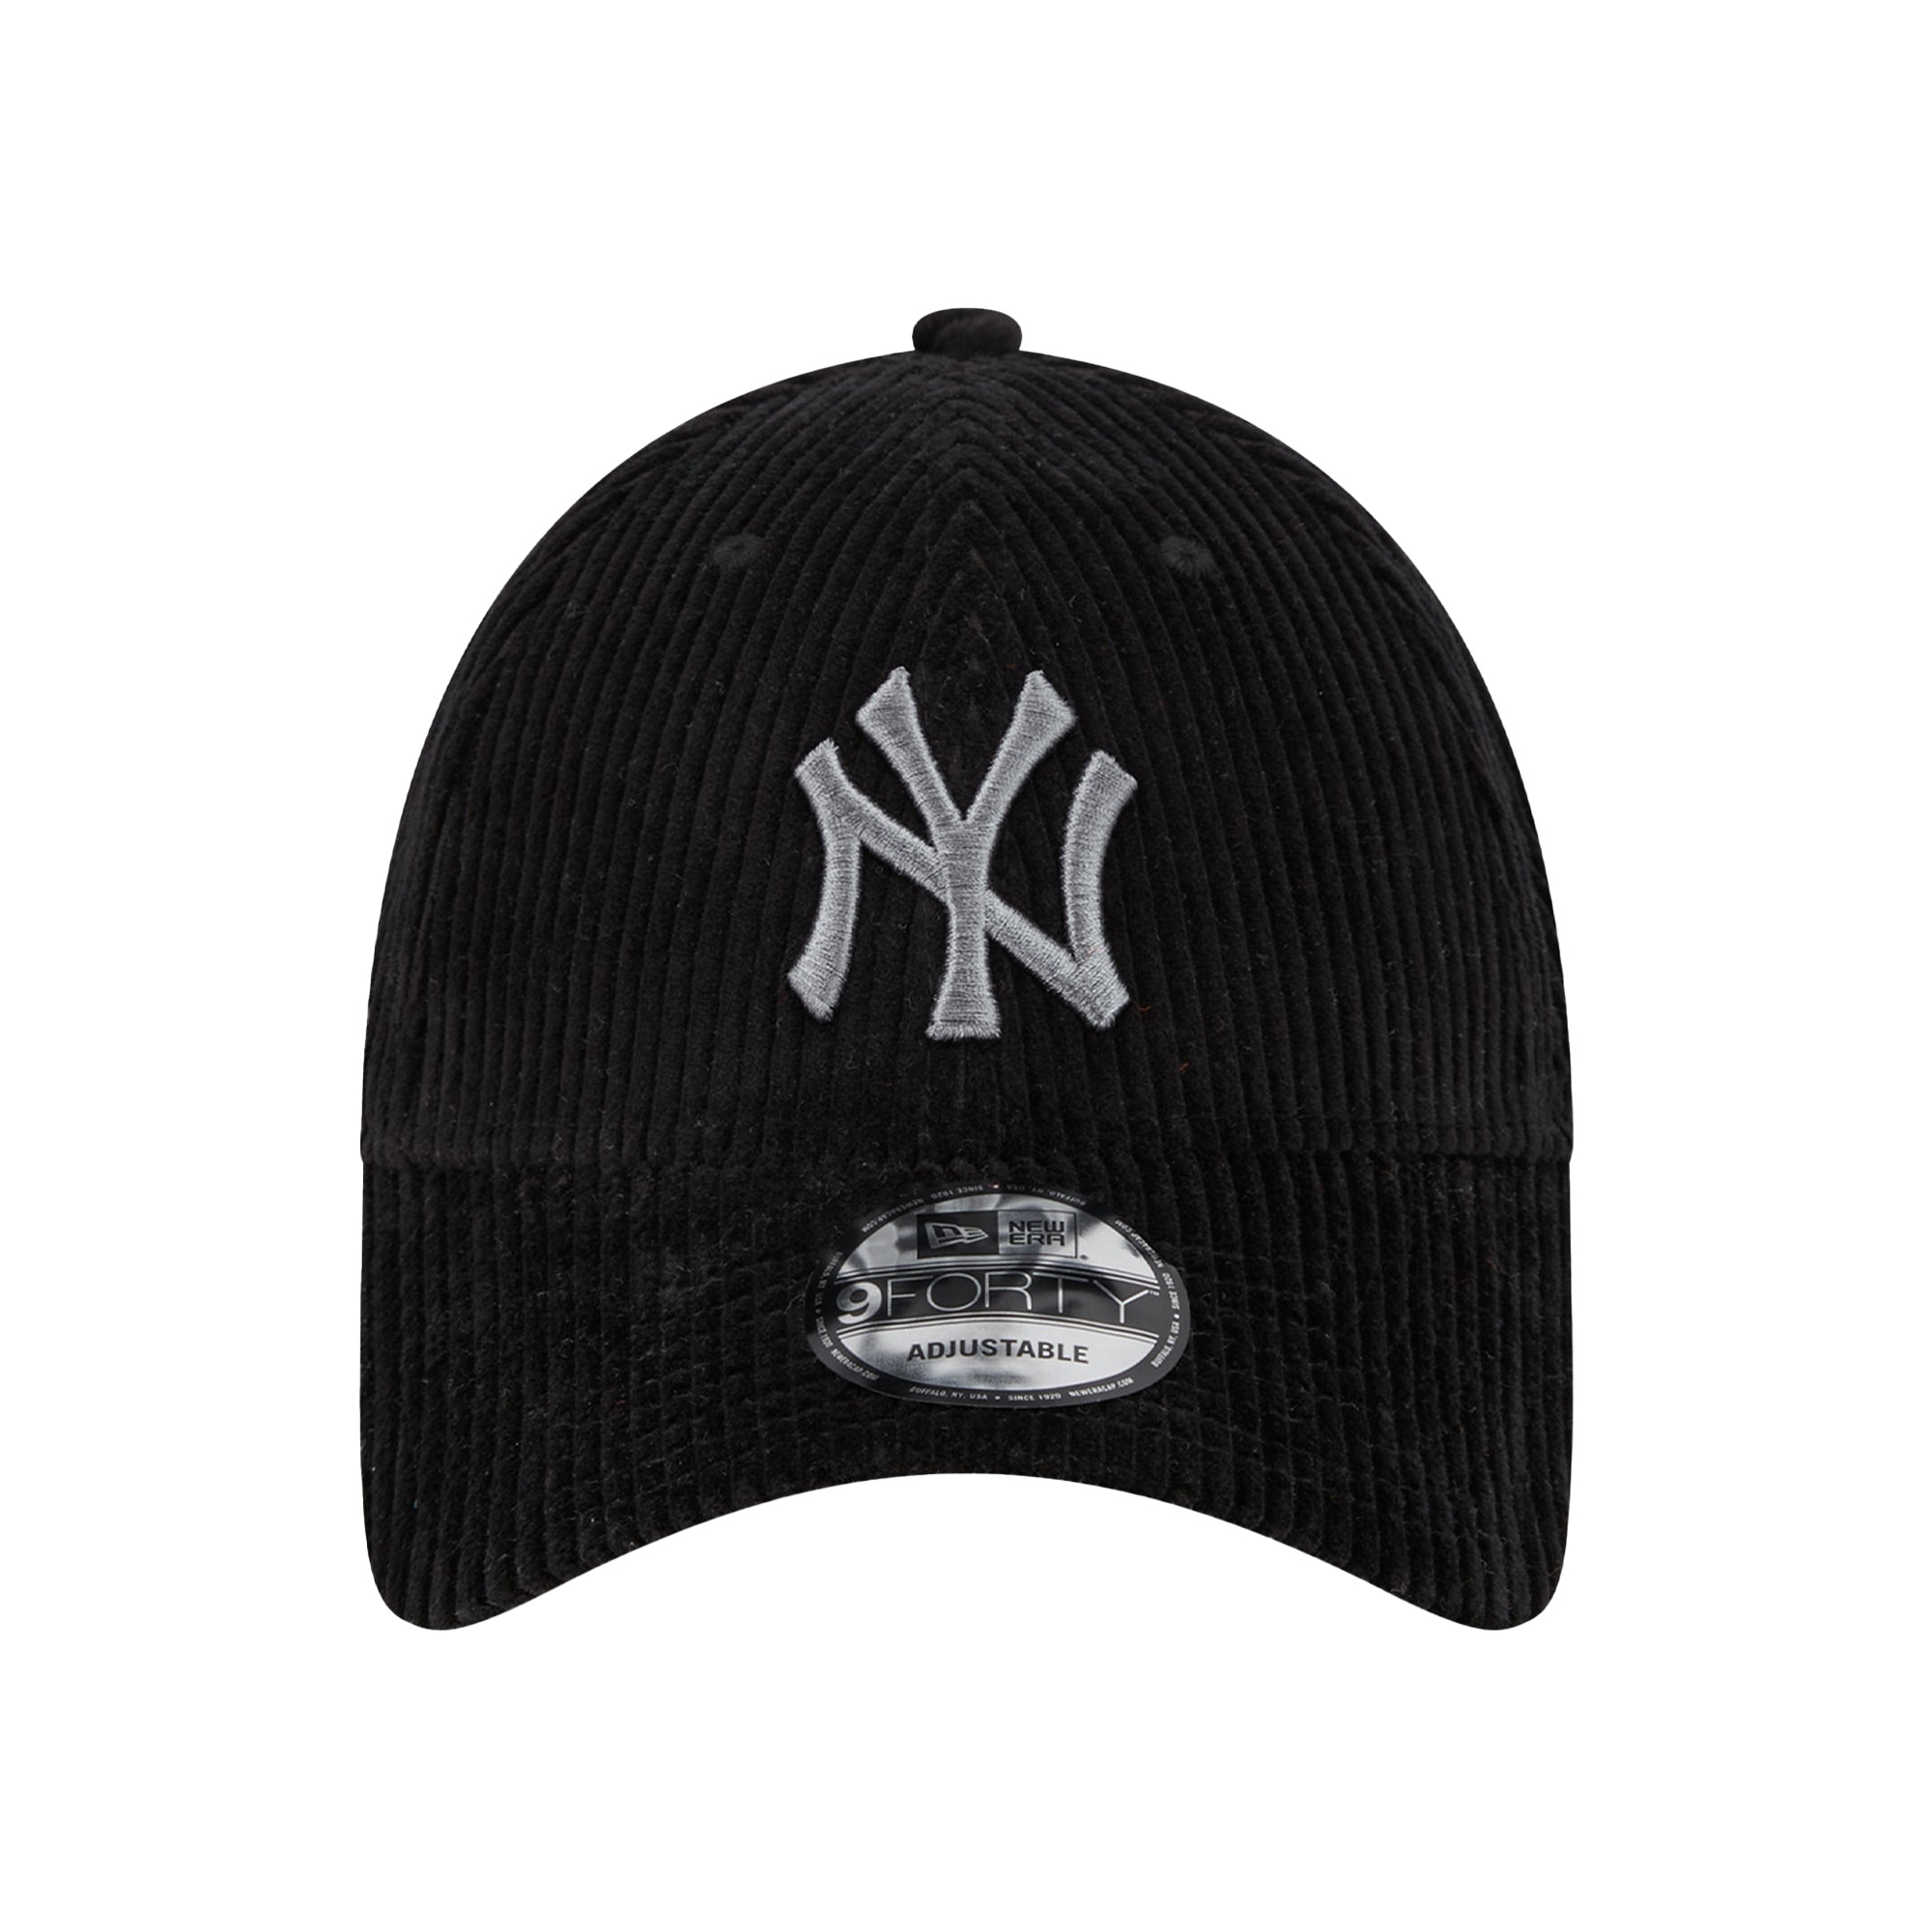 New York Yankees Wide Cord Black 9FORTY Adjustable